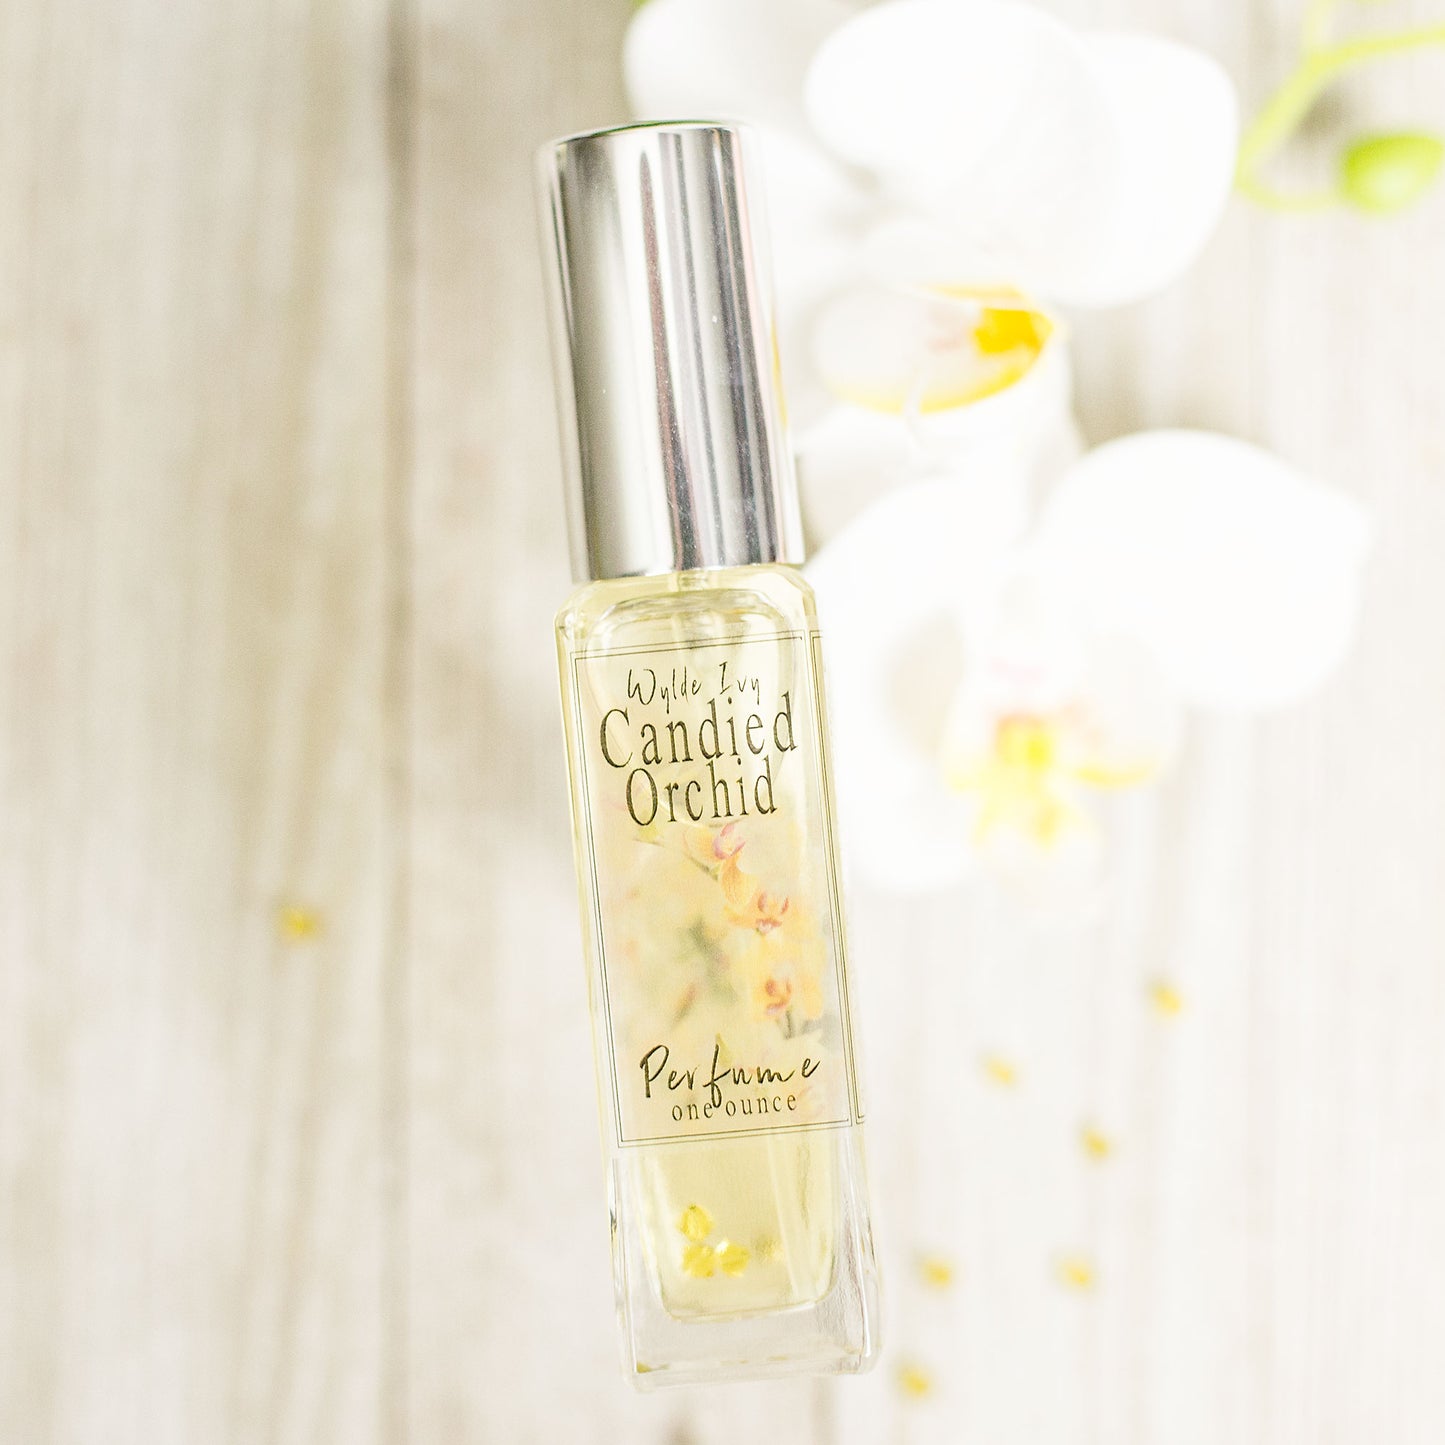 Candied Orchid Perfume